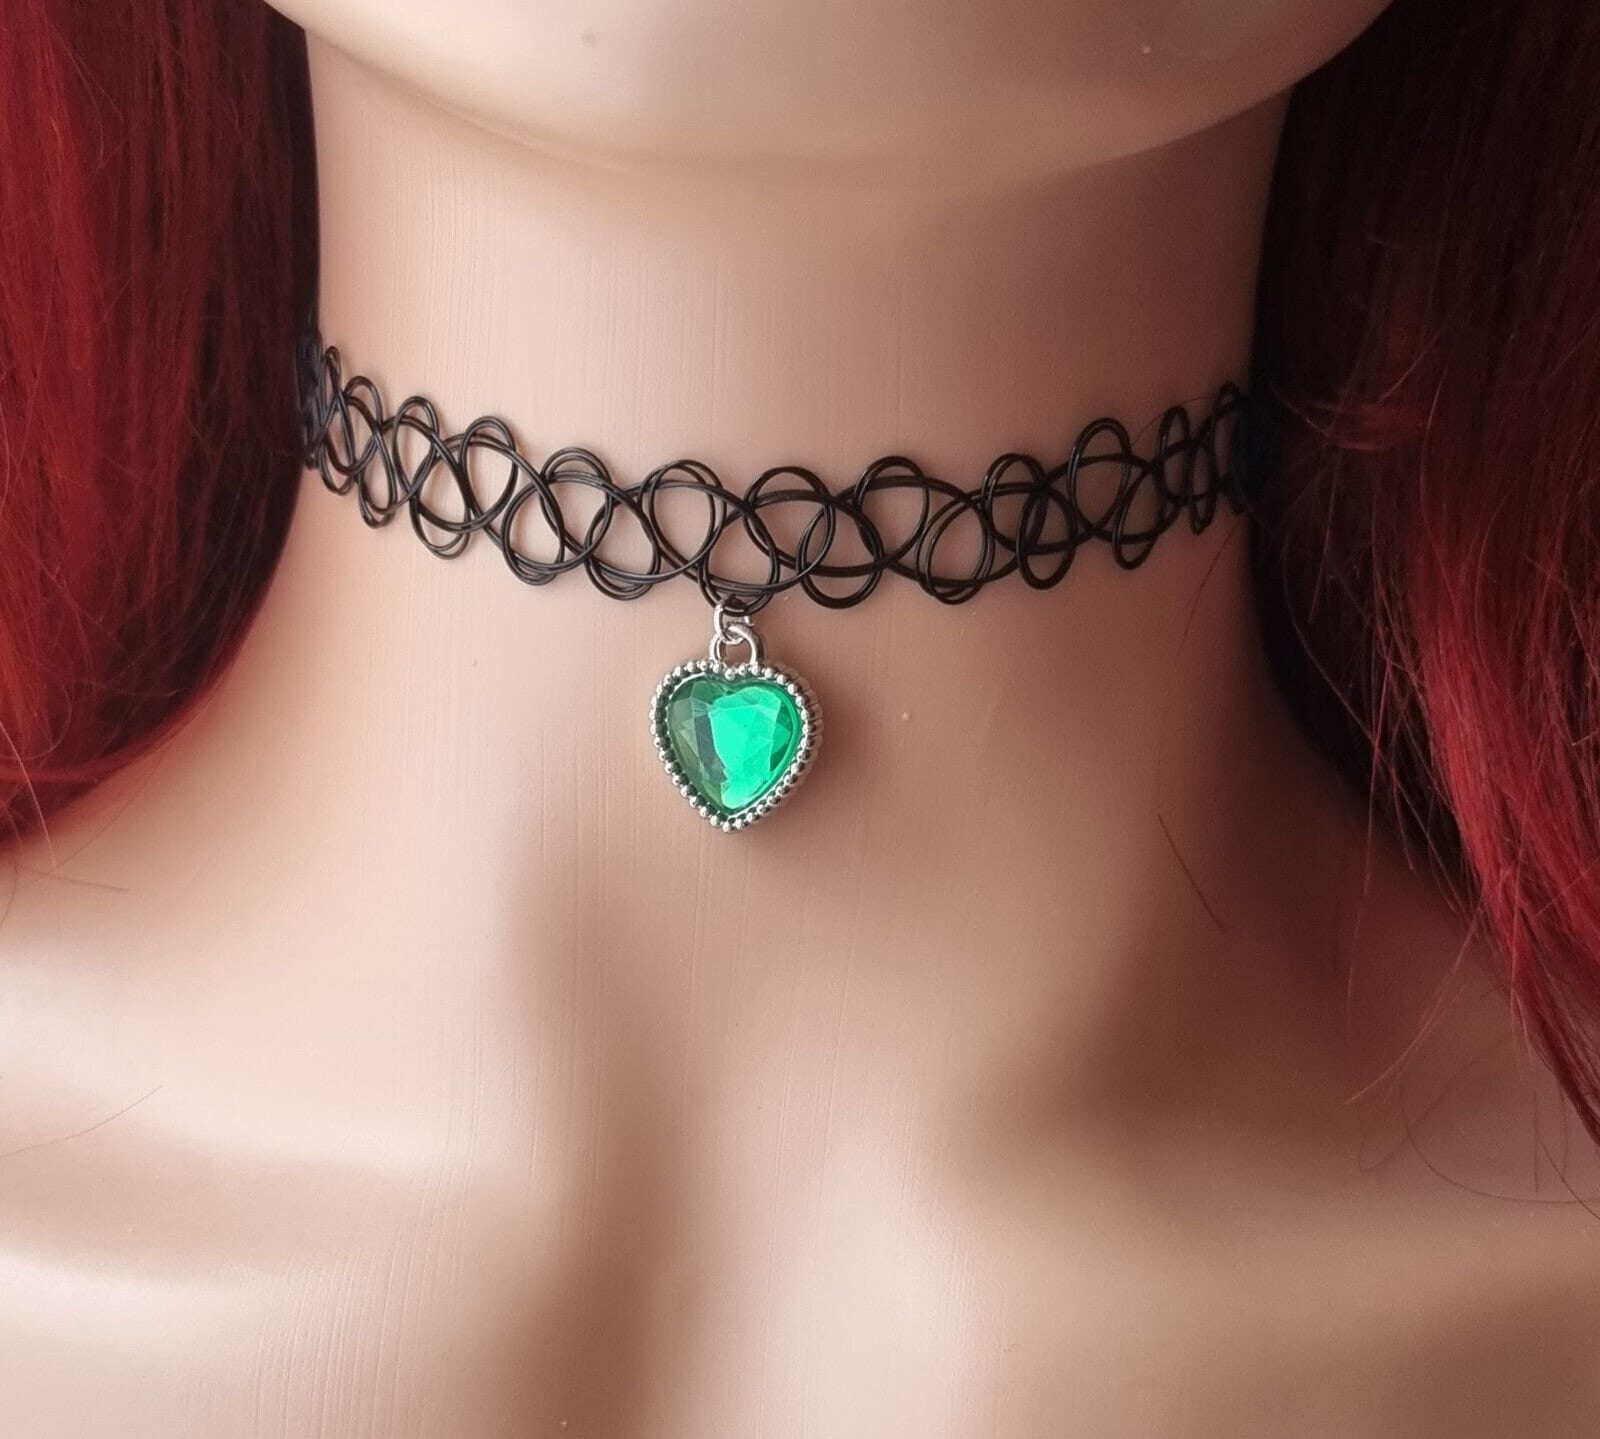 90s grunge tattoo choker and necklace with dragonfly charm…